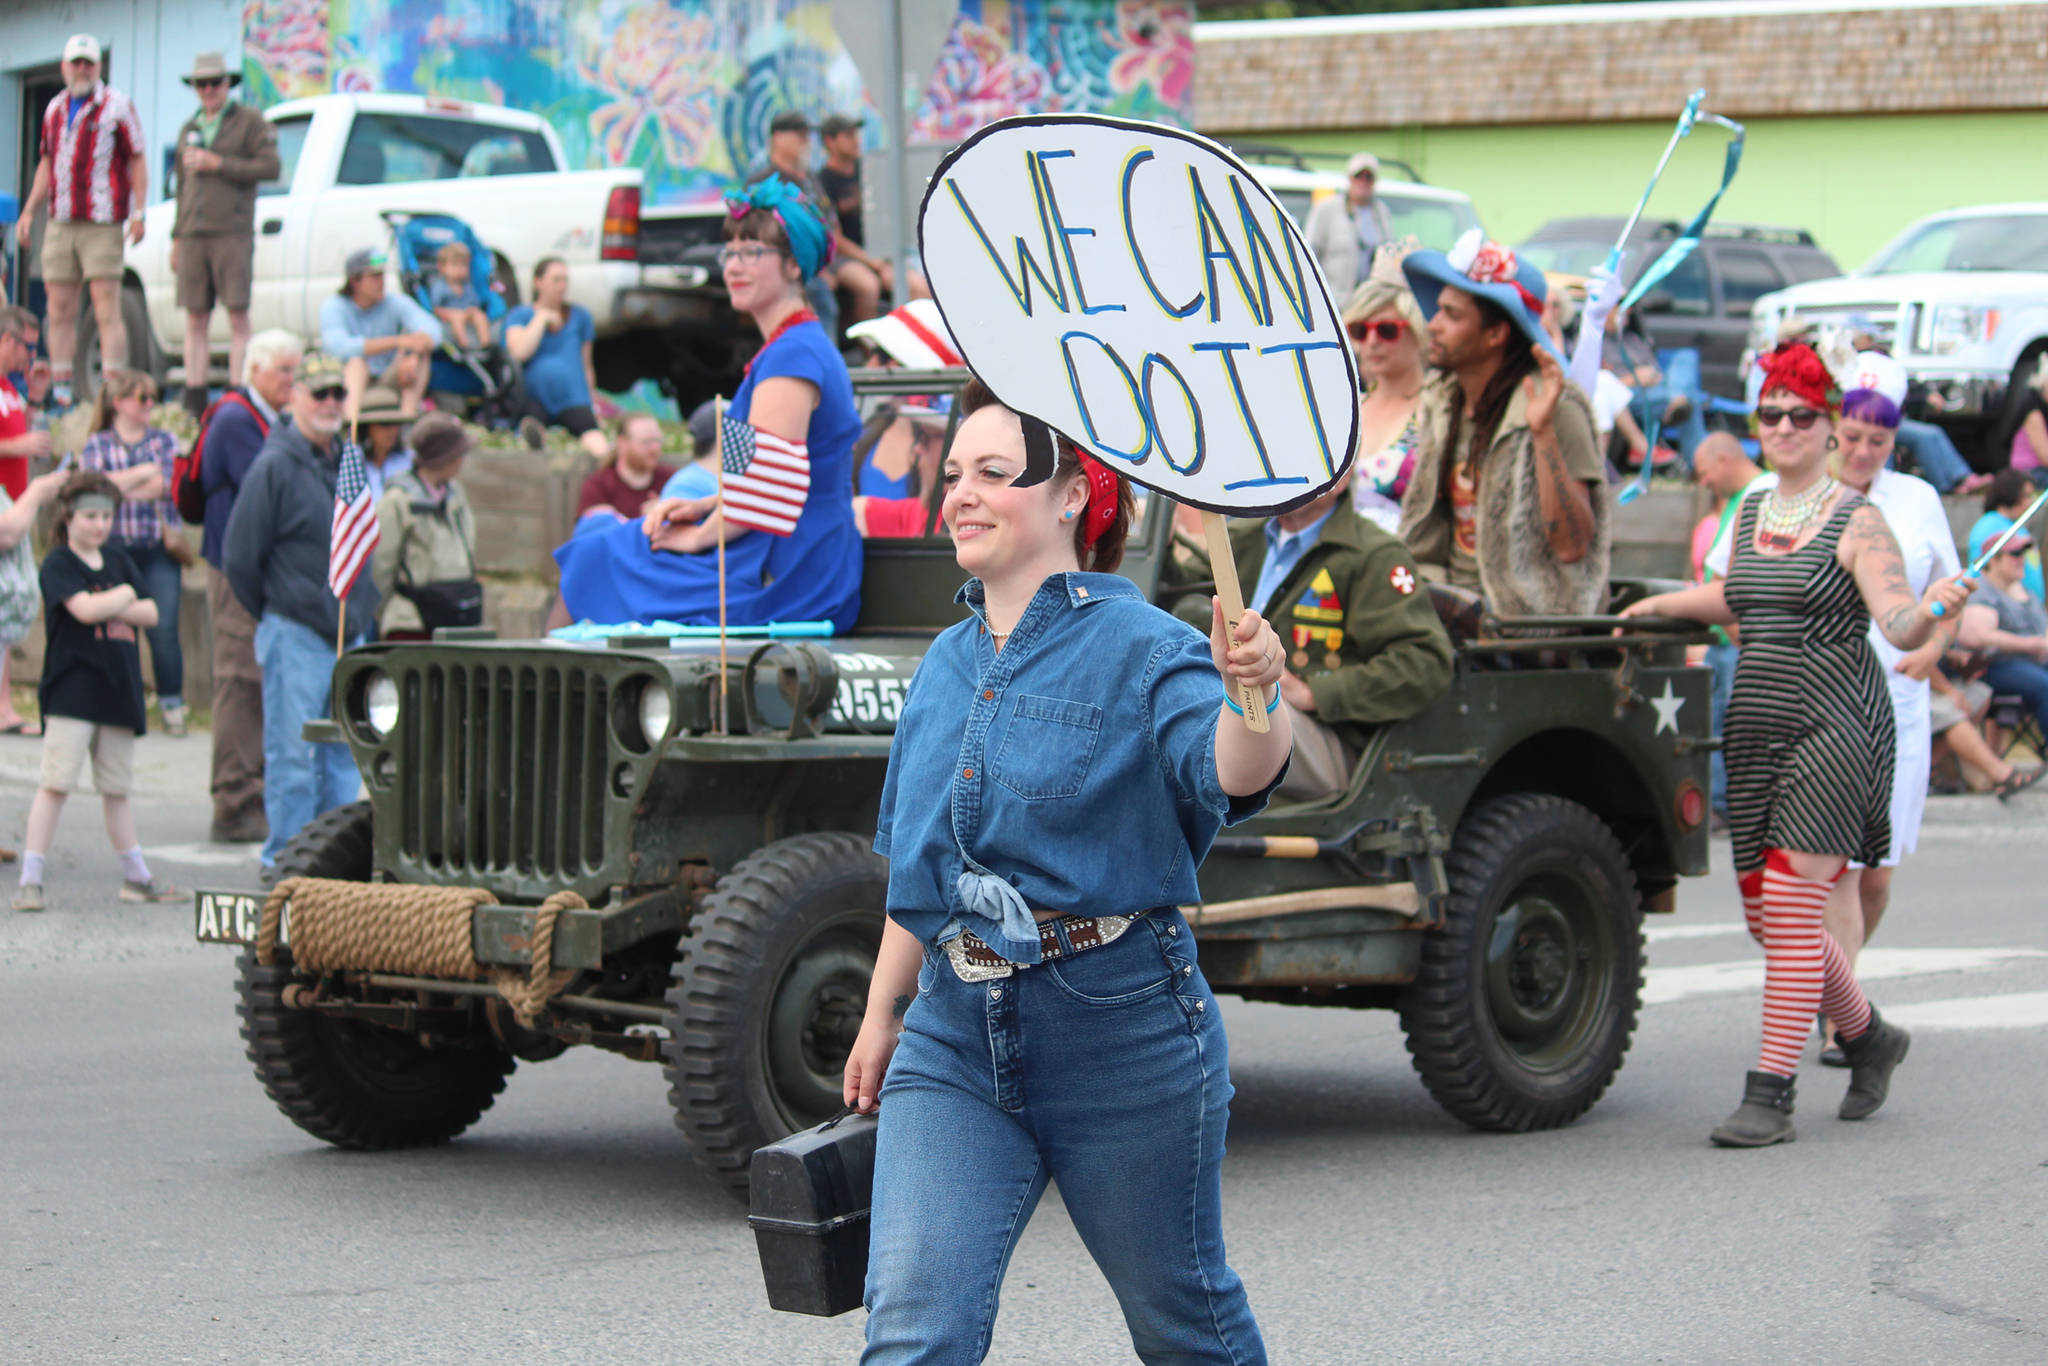 A woman dressed as Rosie the Riveter marches in the July Fourth parade hosted by the Homer Chamber of Commerce on Thursday, July 4, 2019 on Pioneer Avenue in Homer, Alaska. (Photo by Megan Pacer/Homer News)